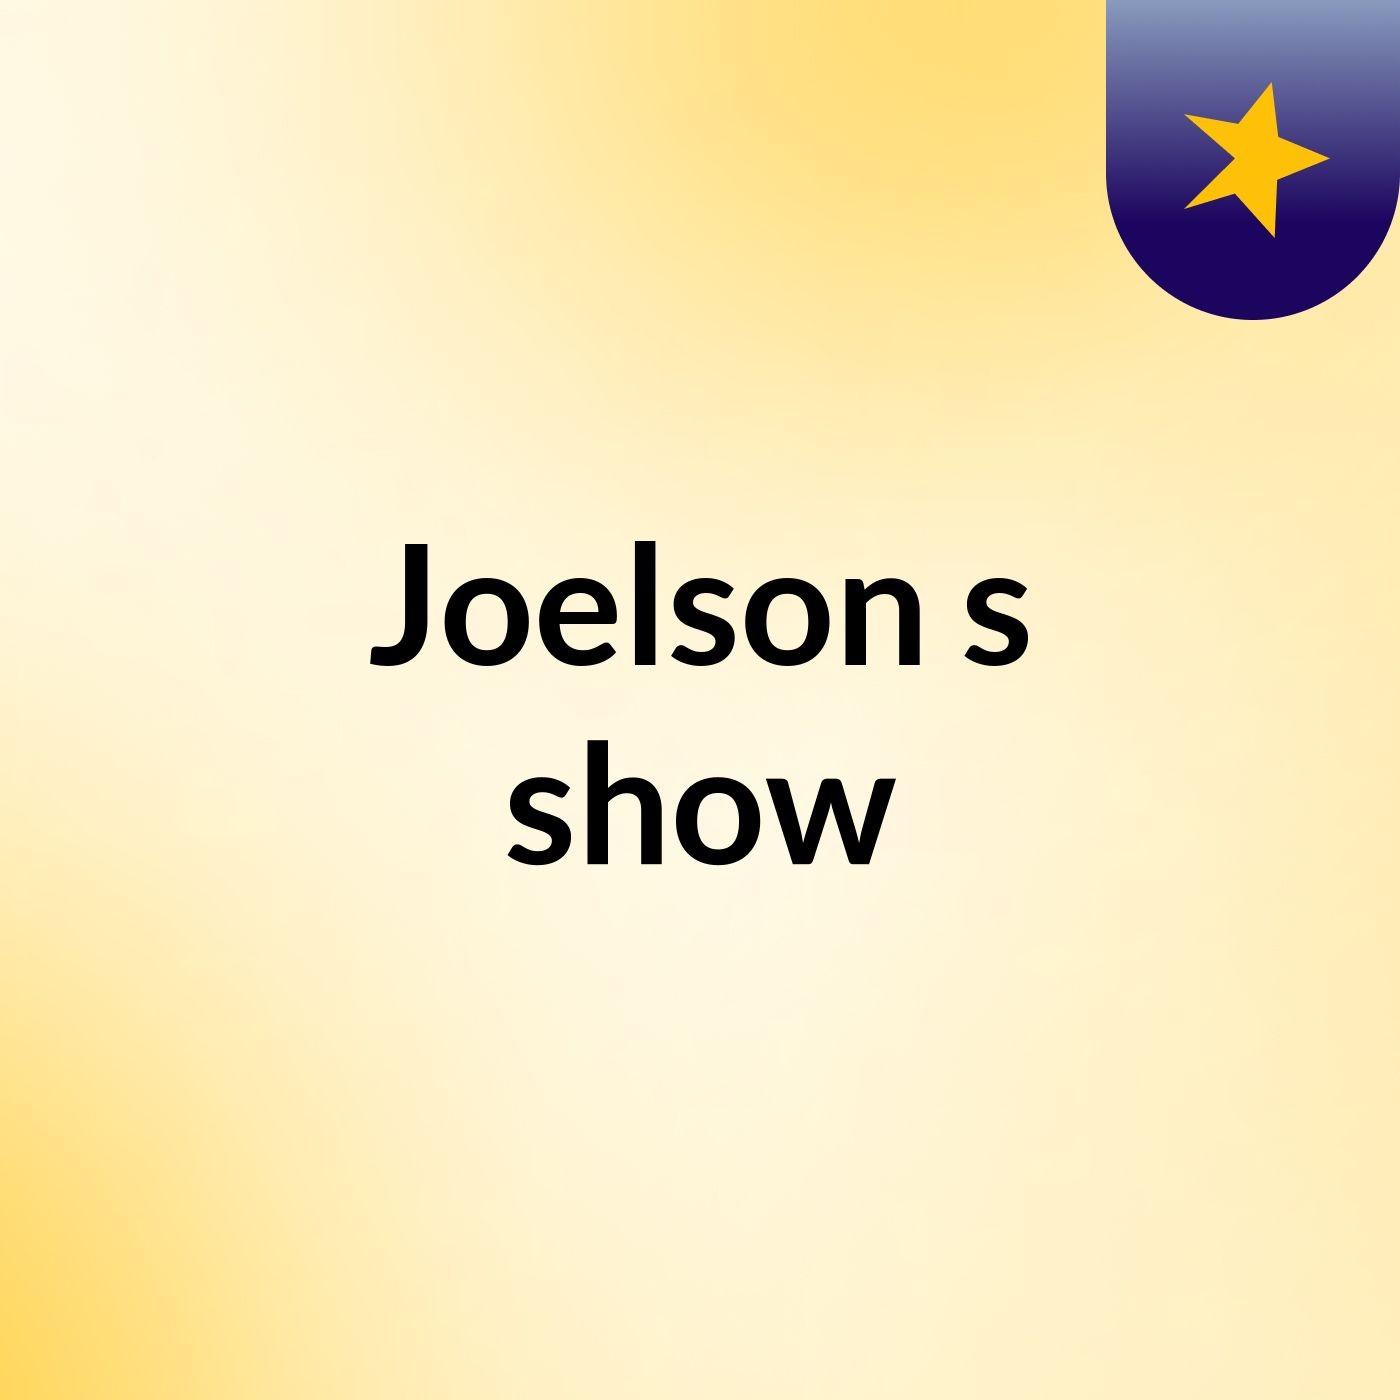 Joelson's show